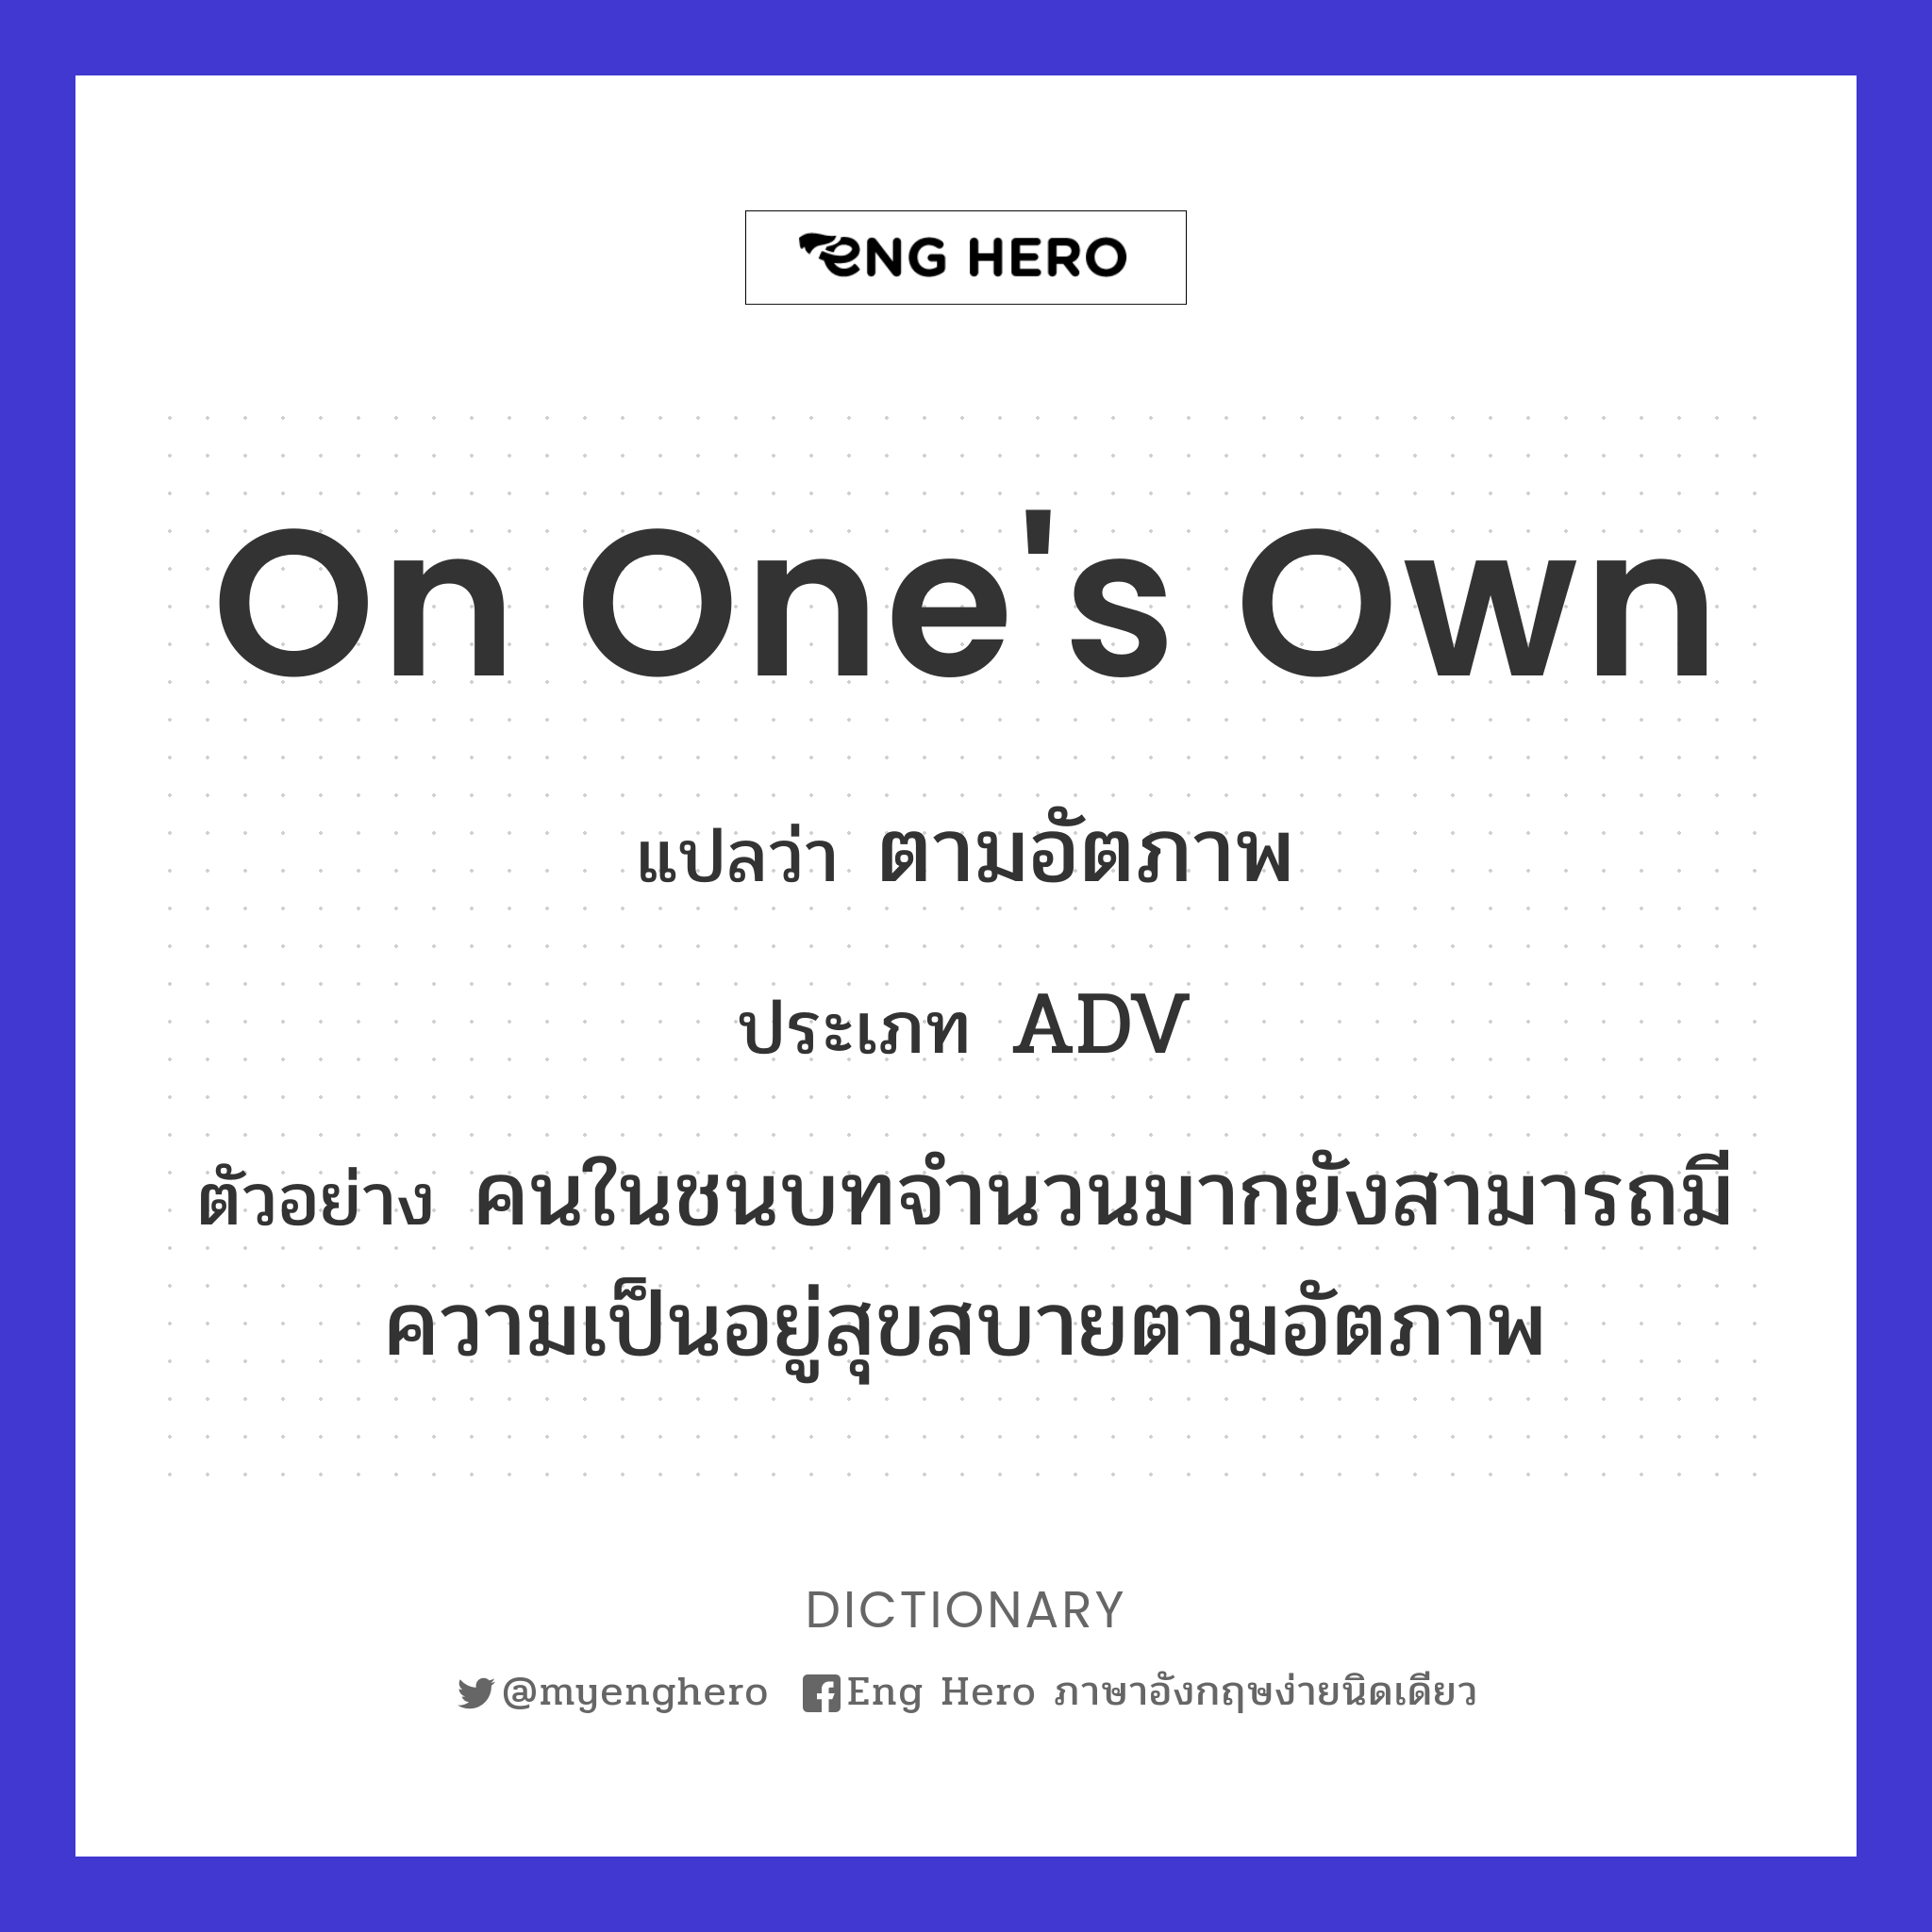 on one's own